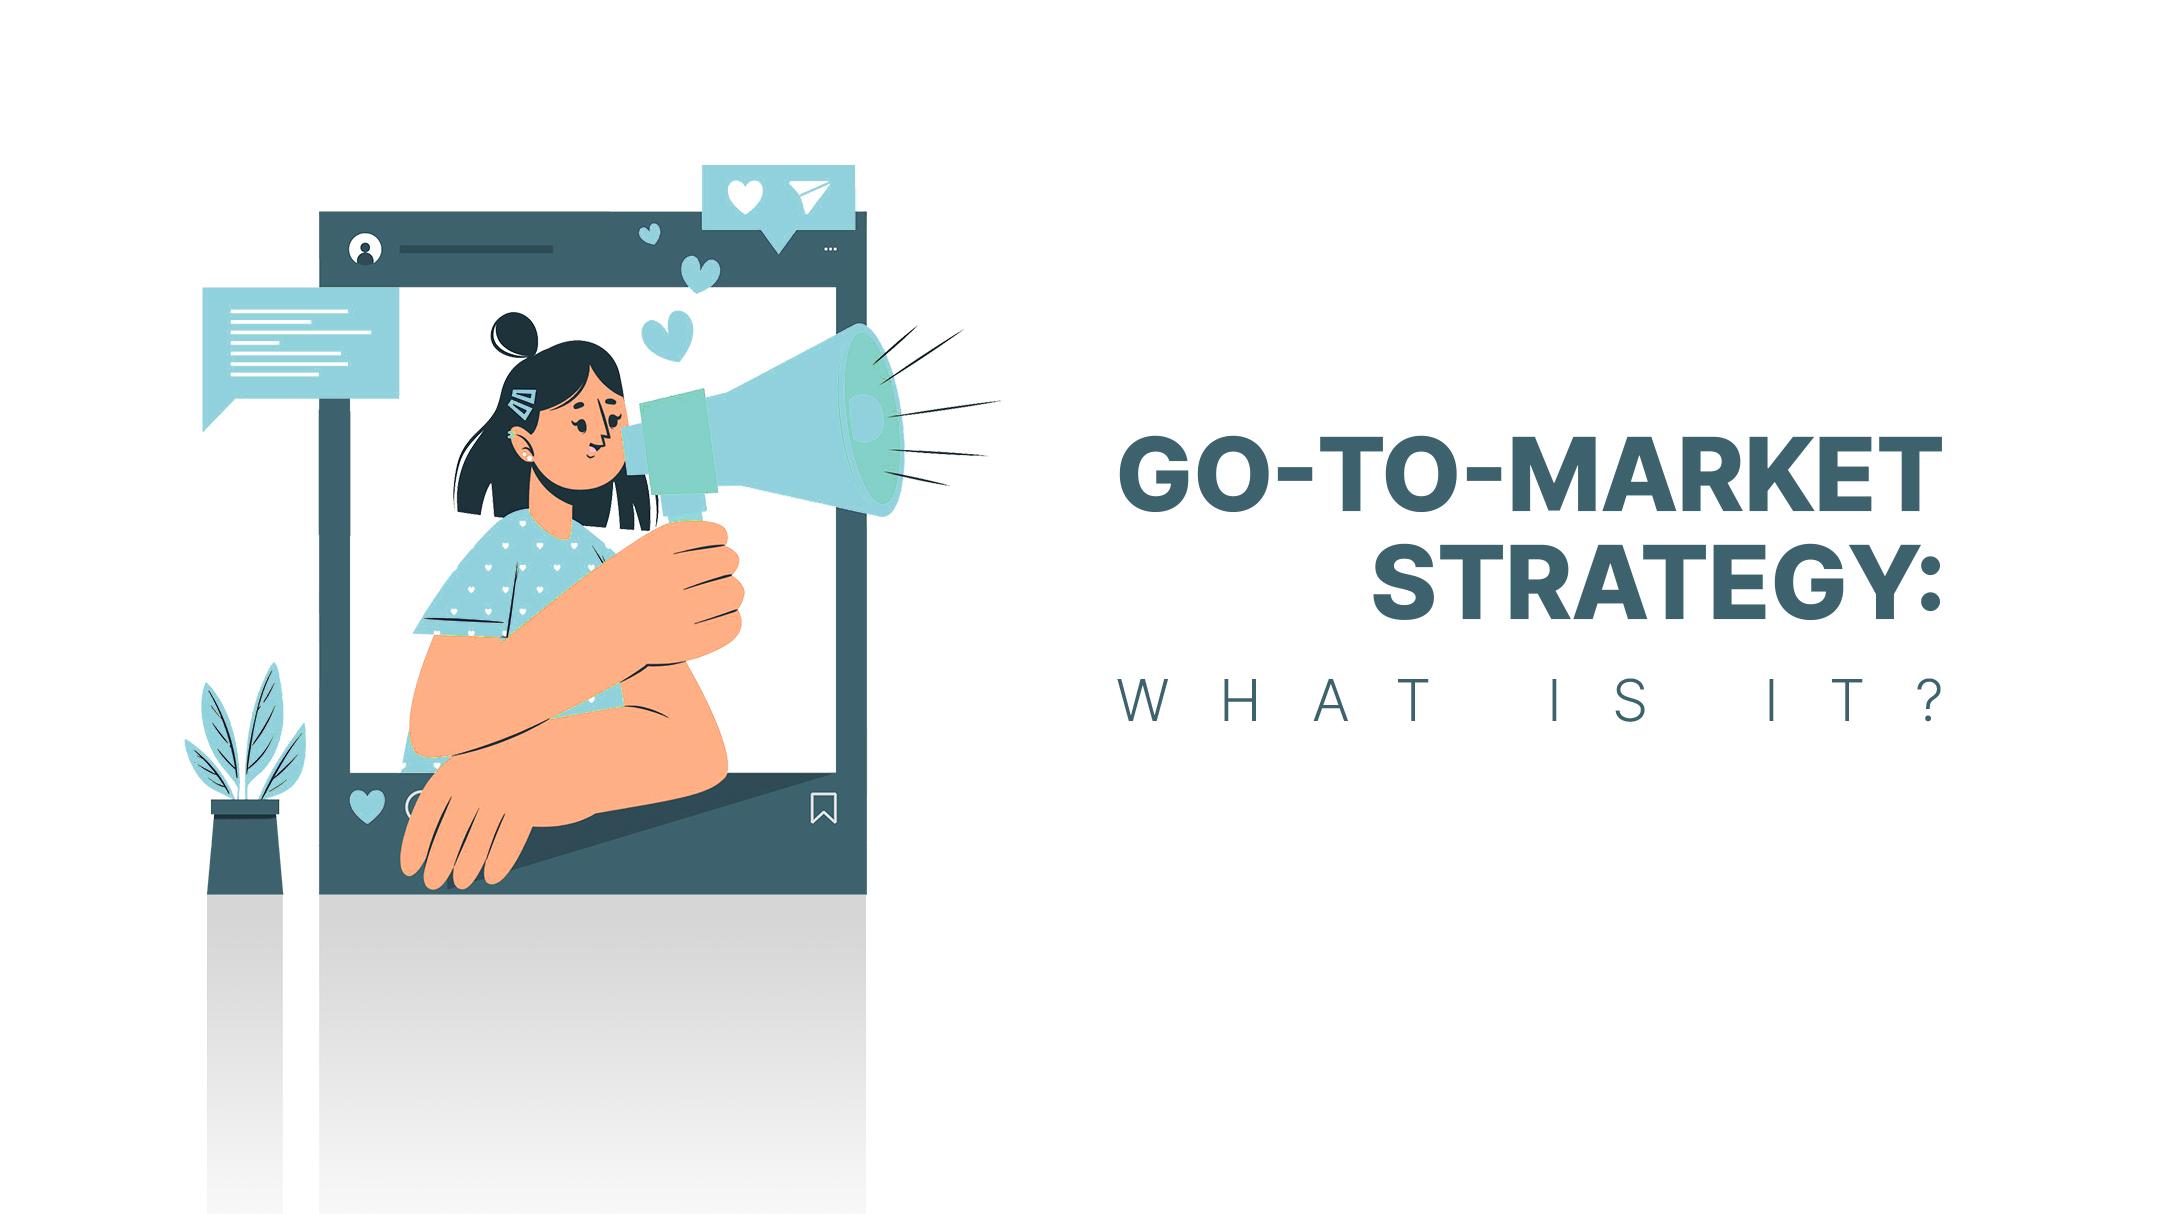 Go-to-Market Strategy: What Is It?